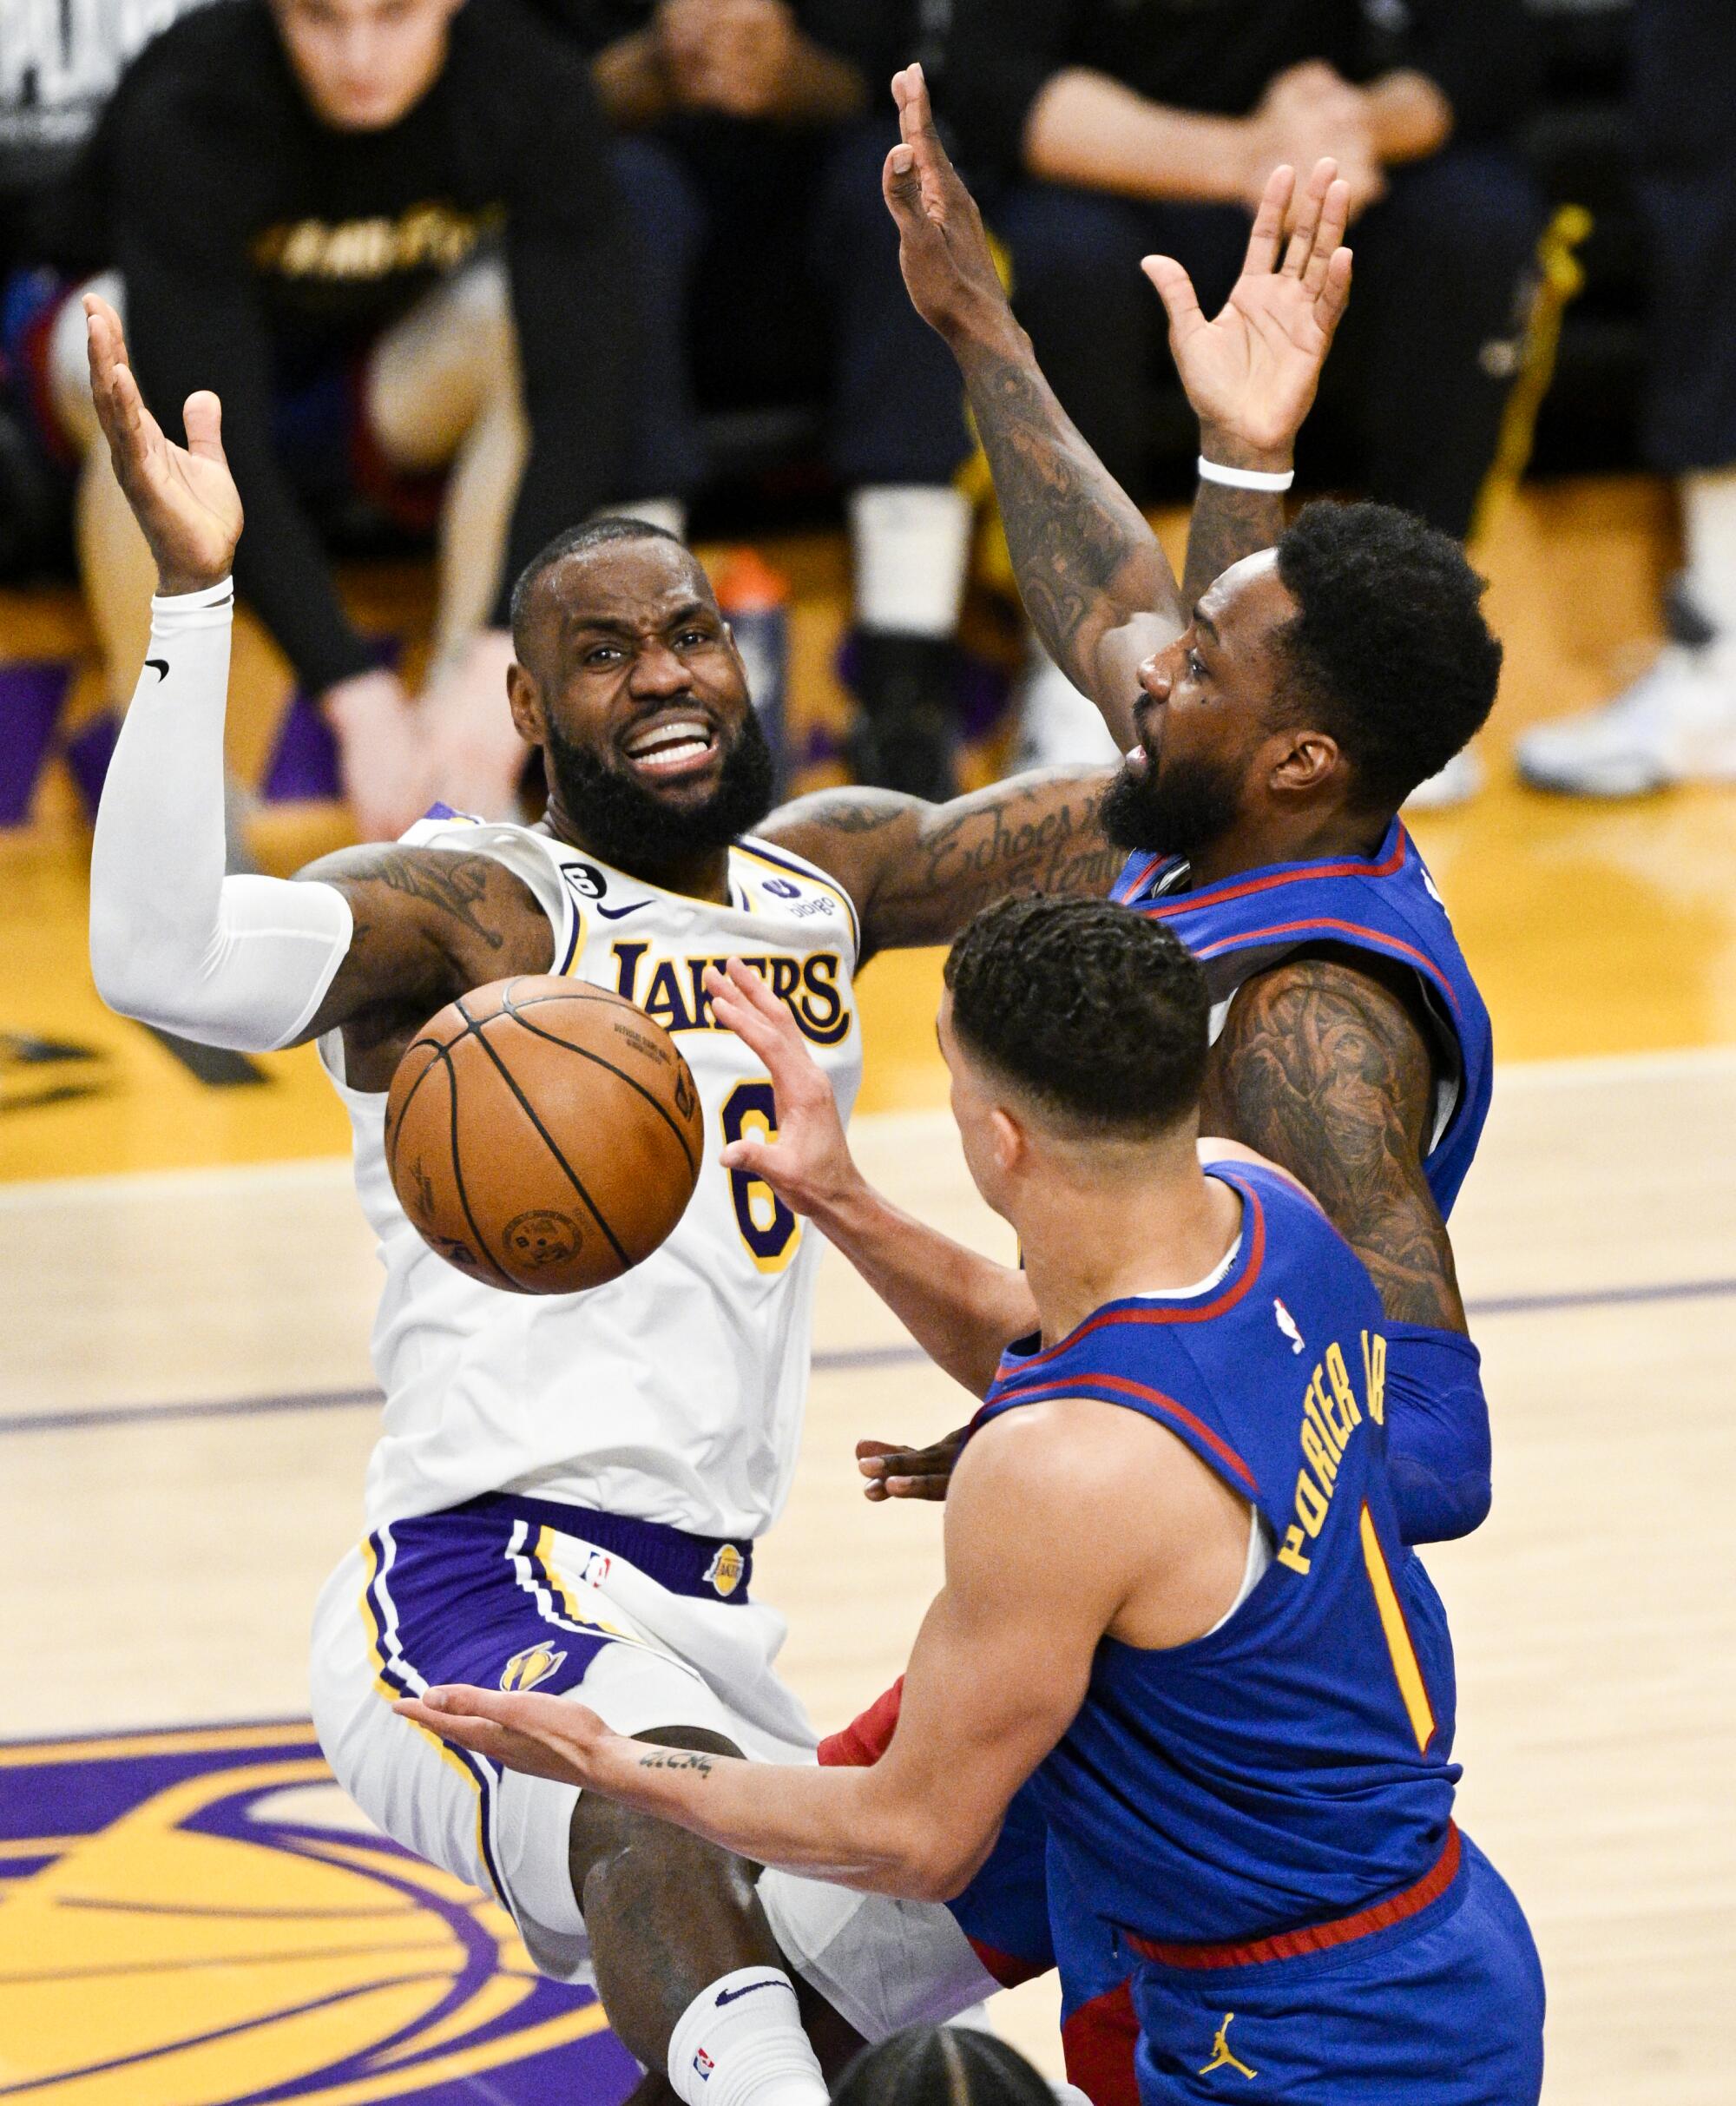 Lakers forward LeBron James reacts after losing the ball in front of Nuggets' Jeff Green and Michael Porter Jr.